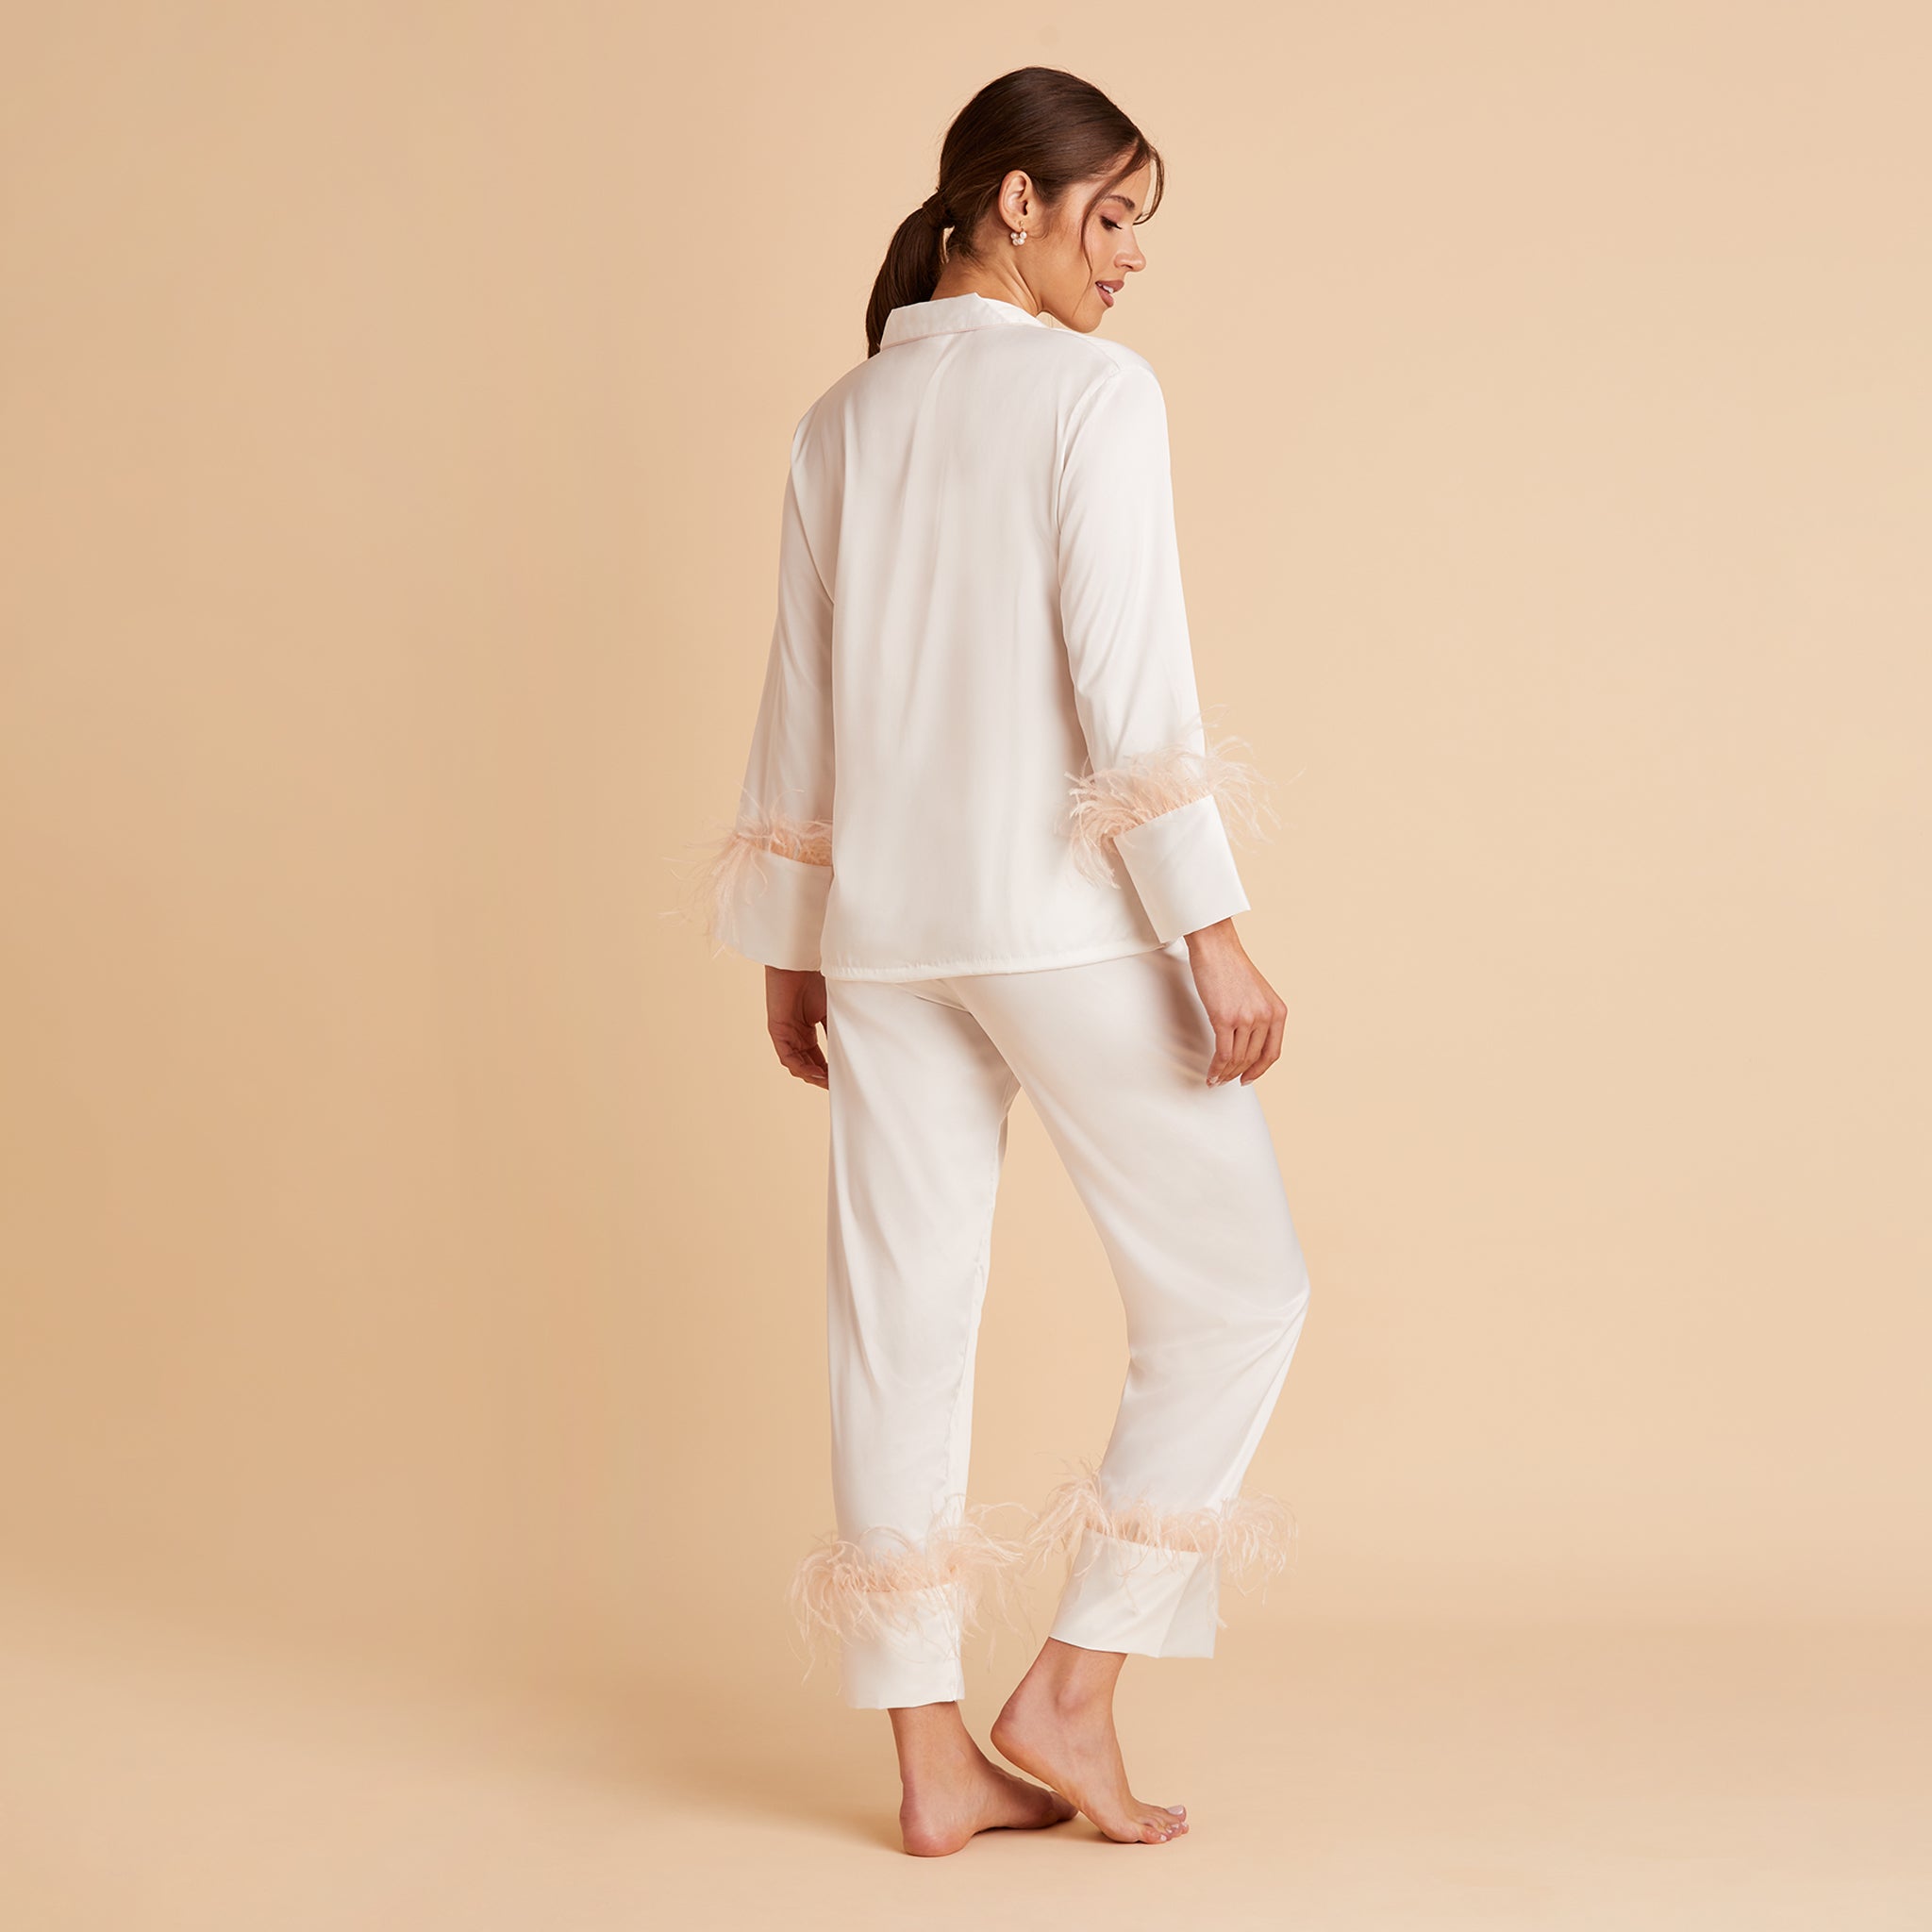 Feathered Pajama Set in white by Birdy Grey, back view